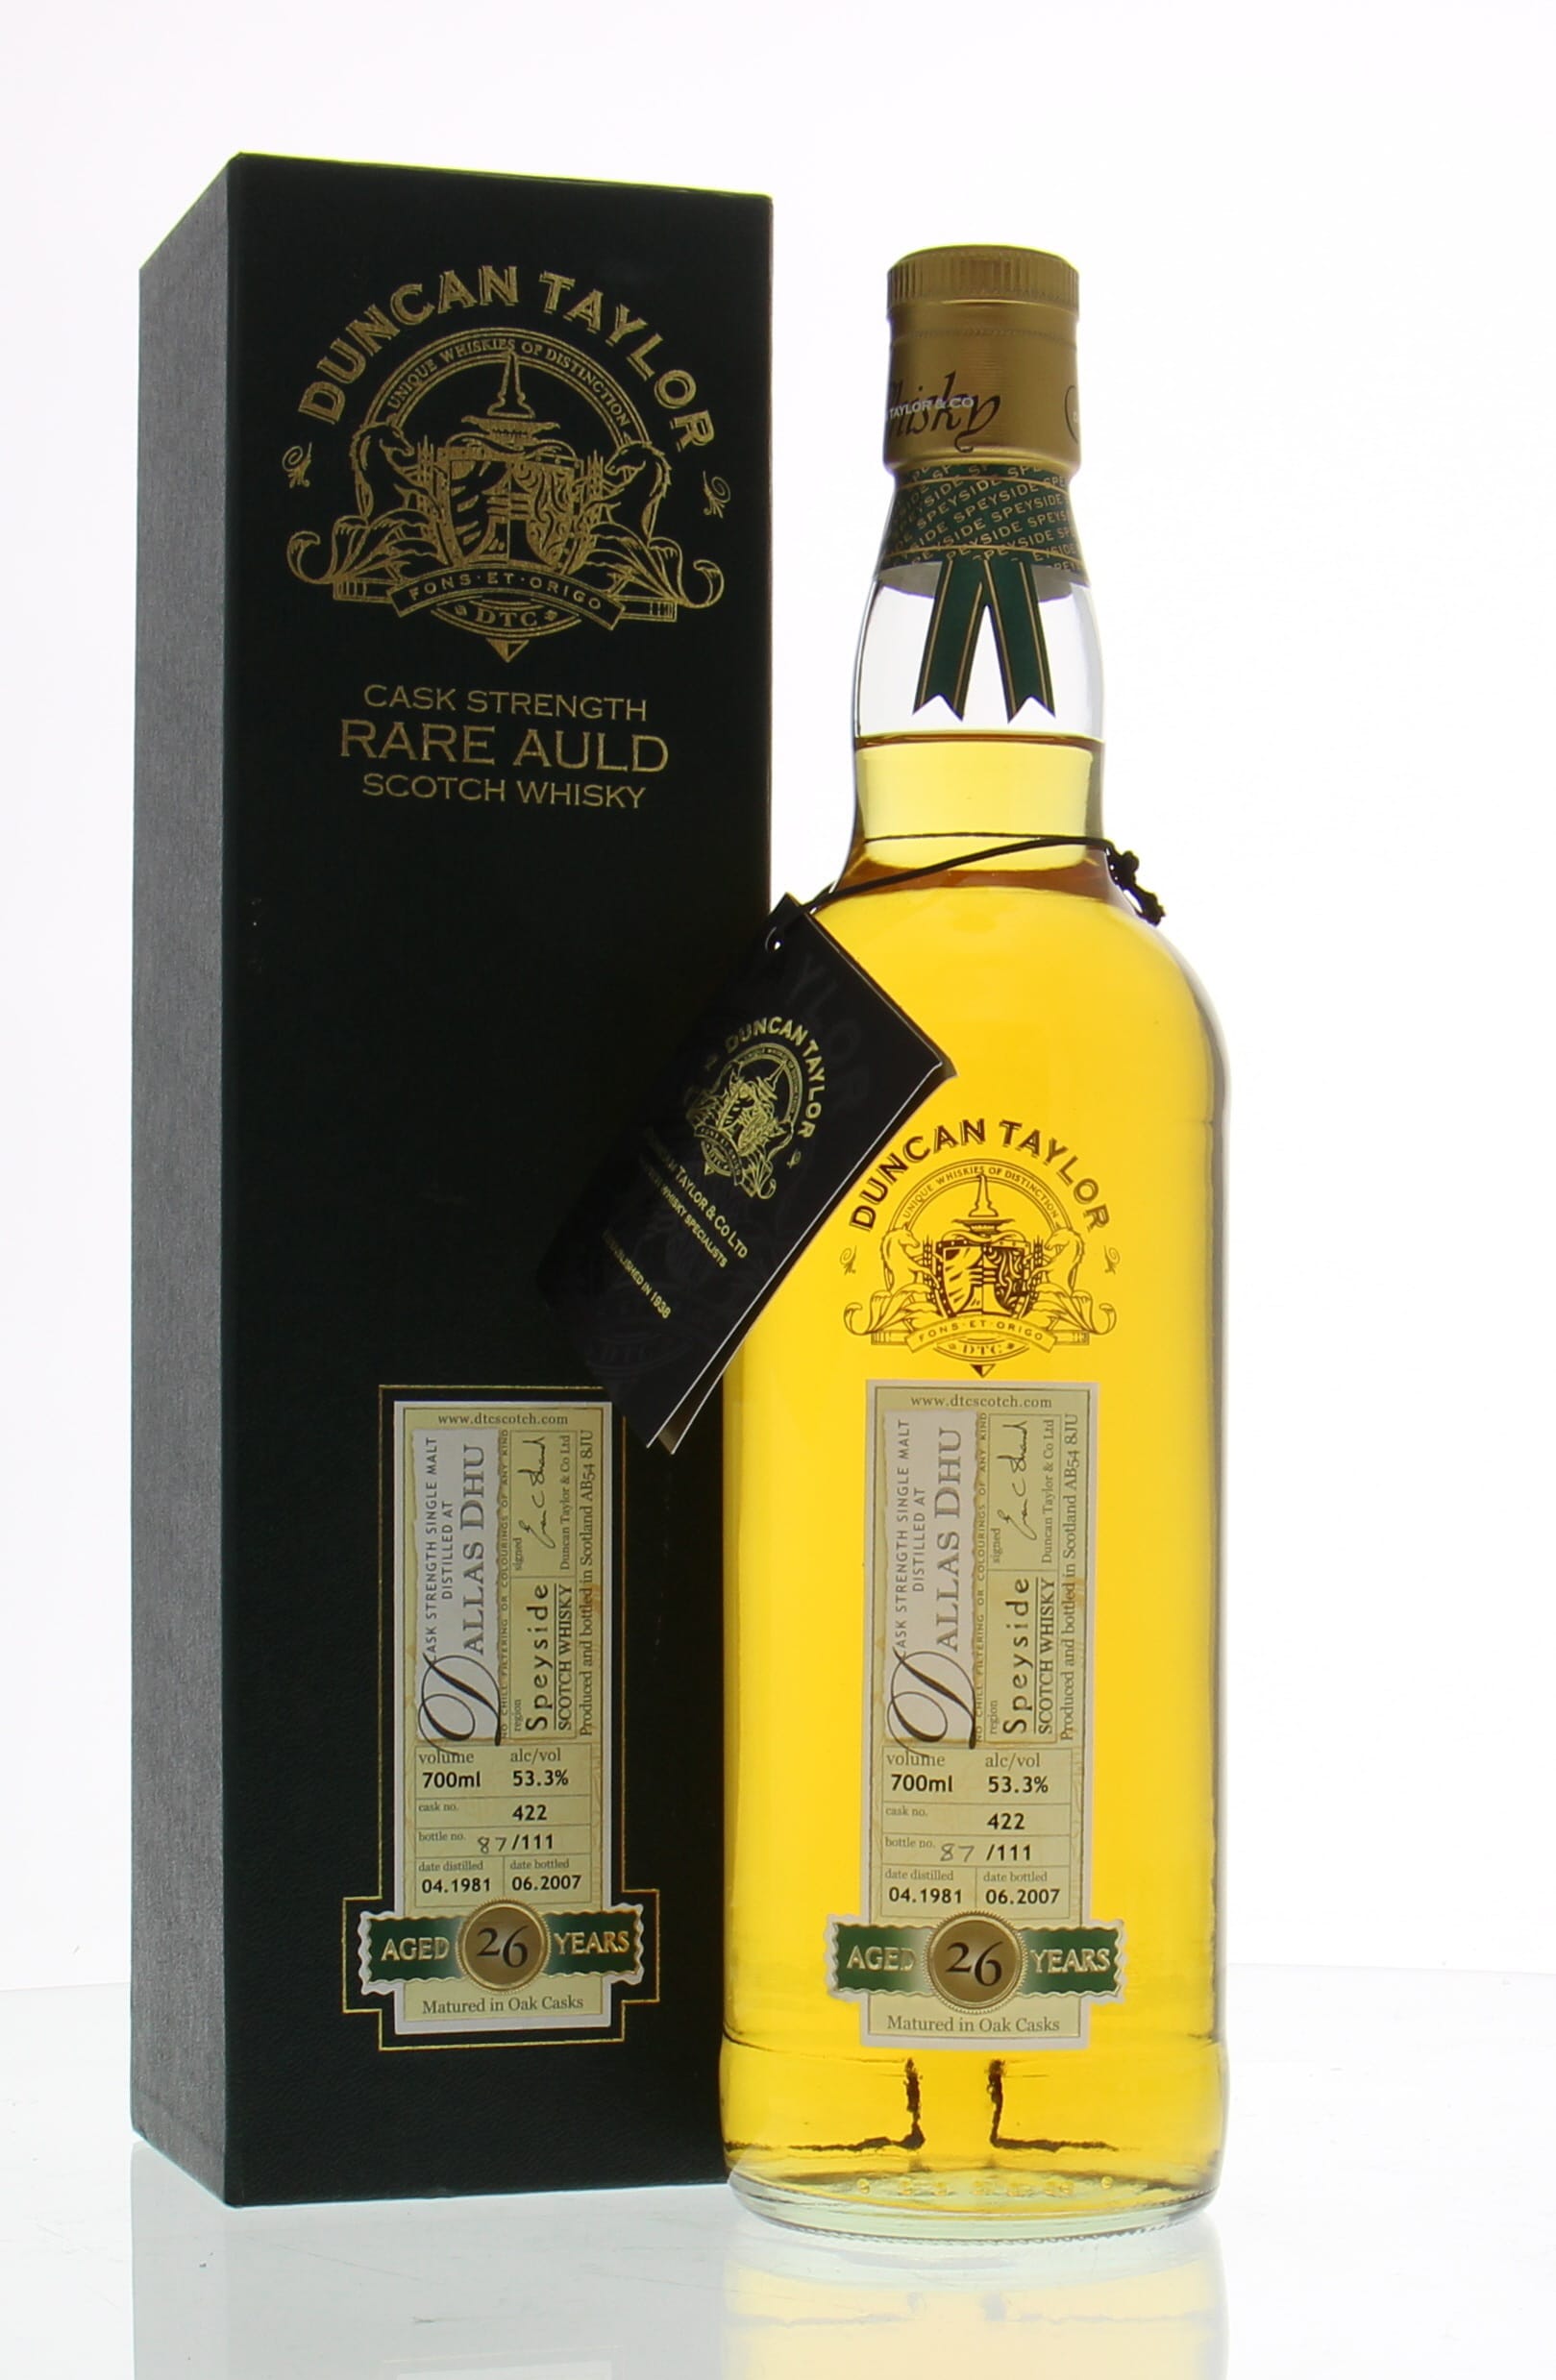 Dallas Dhu - 26 Years Old Rare Auld Duncan Taylor Cask:422 53.3% 1981 In Original Container